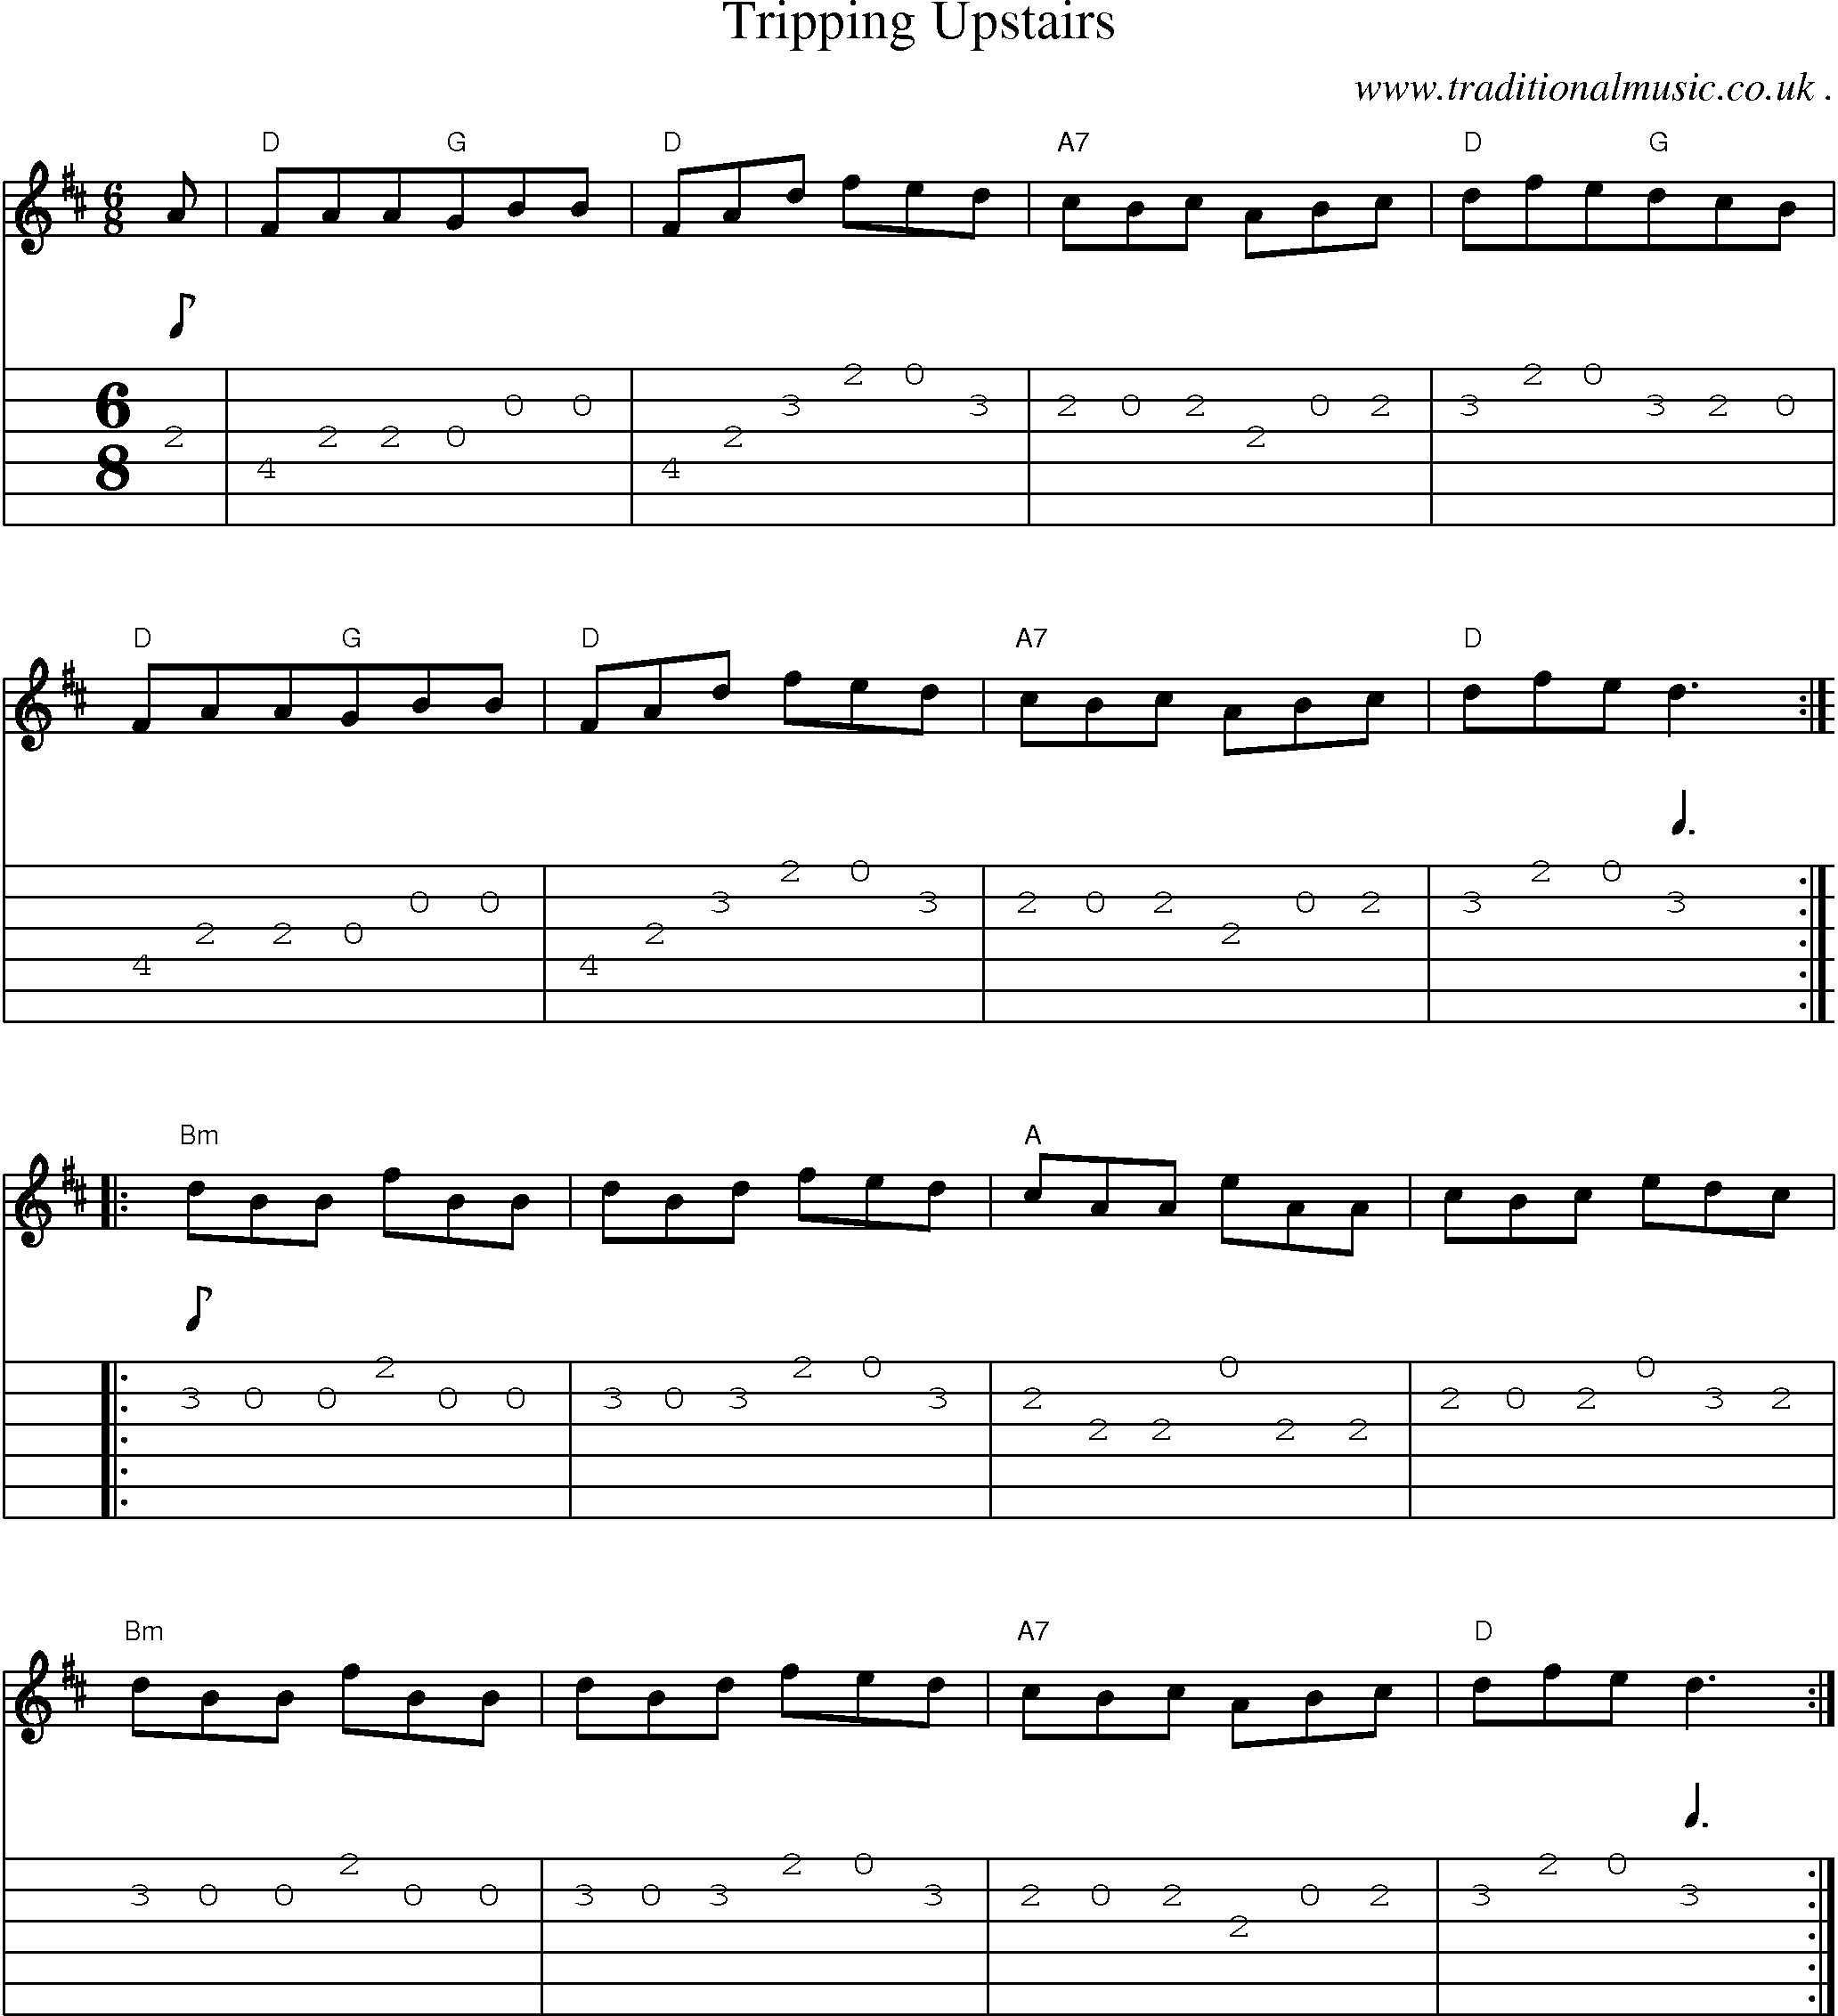 Sheet-Music and Guitar Tabs for Tripping Upstairs